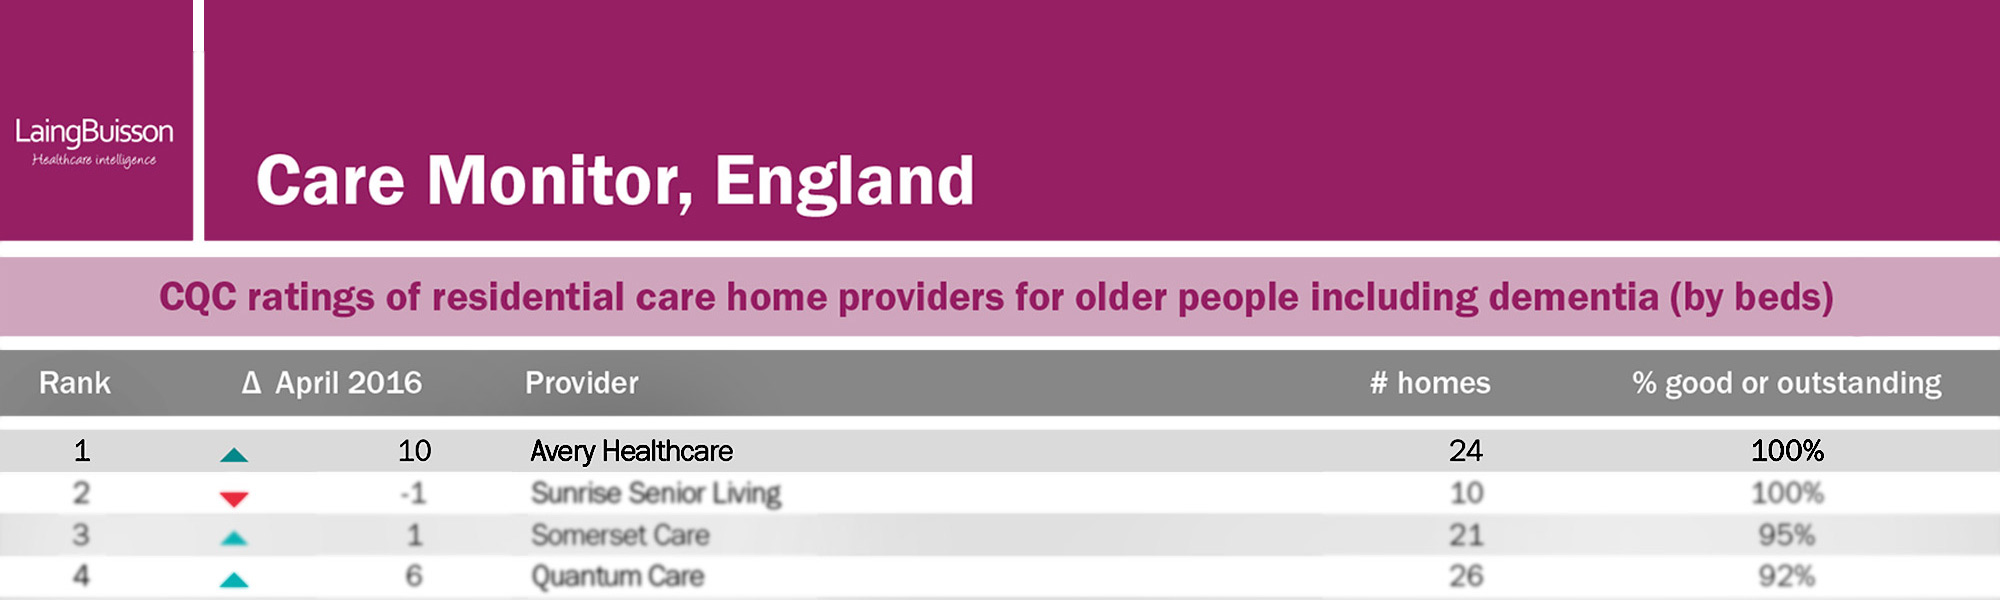 Banner-Hero-2-Image-Laing-Buisson-Table-Top-Ten-on-CQC-ratings-of-residential-care-home-providers-for-older-people-including-dementia-by-beds